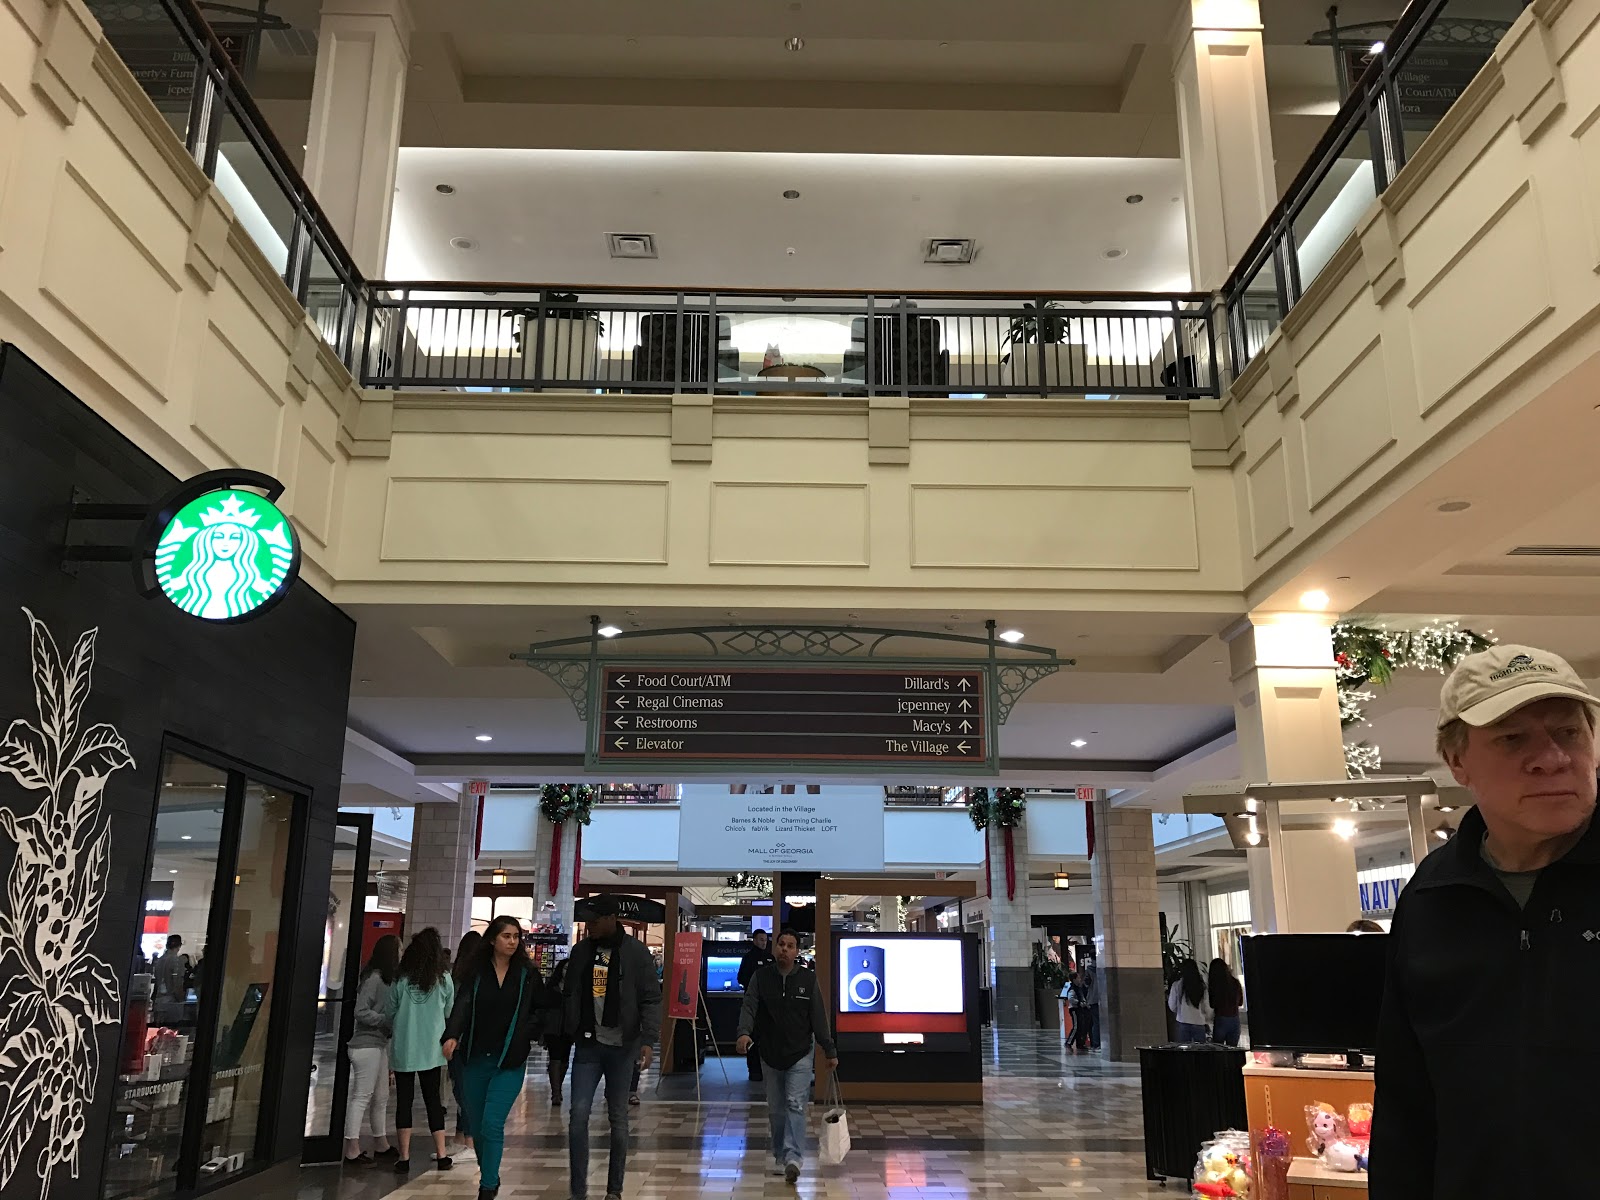 Mall of Georgia - All You Need to Know BEFORE You Go (with Photos)